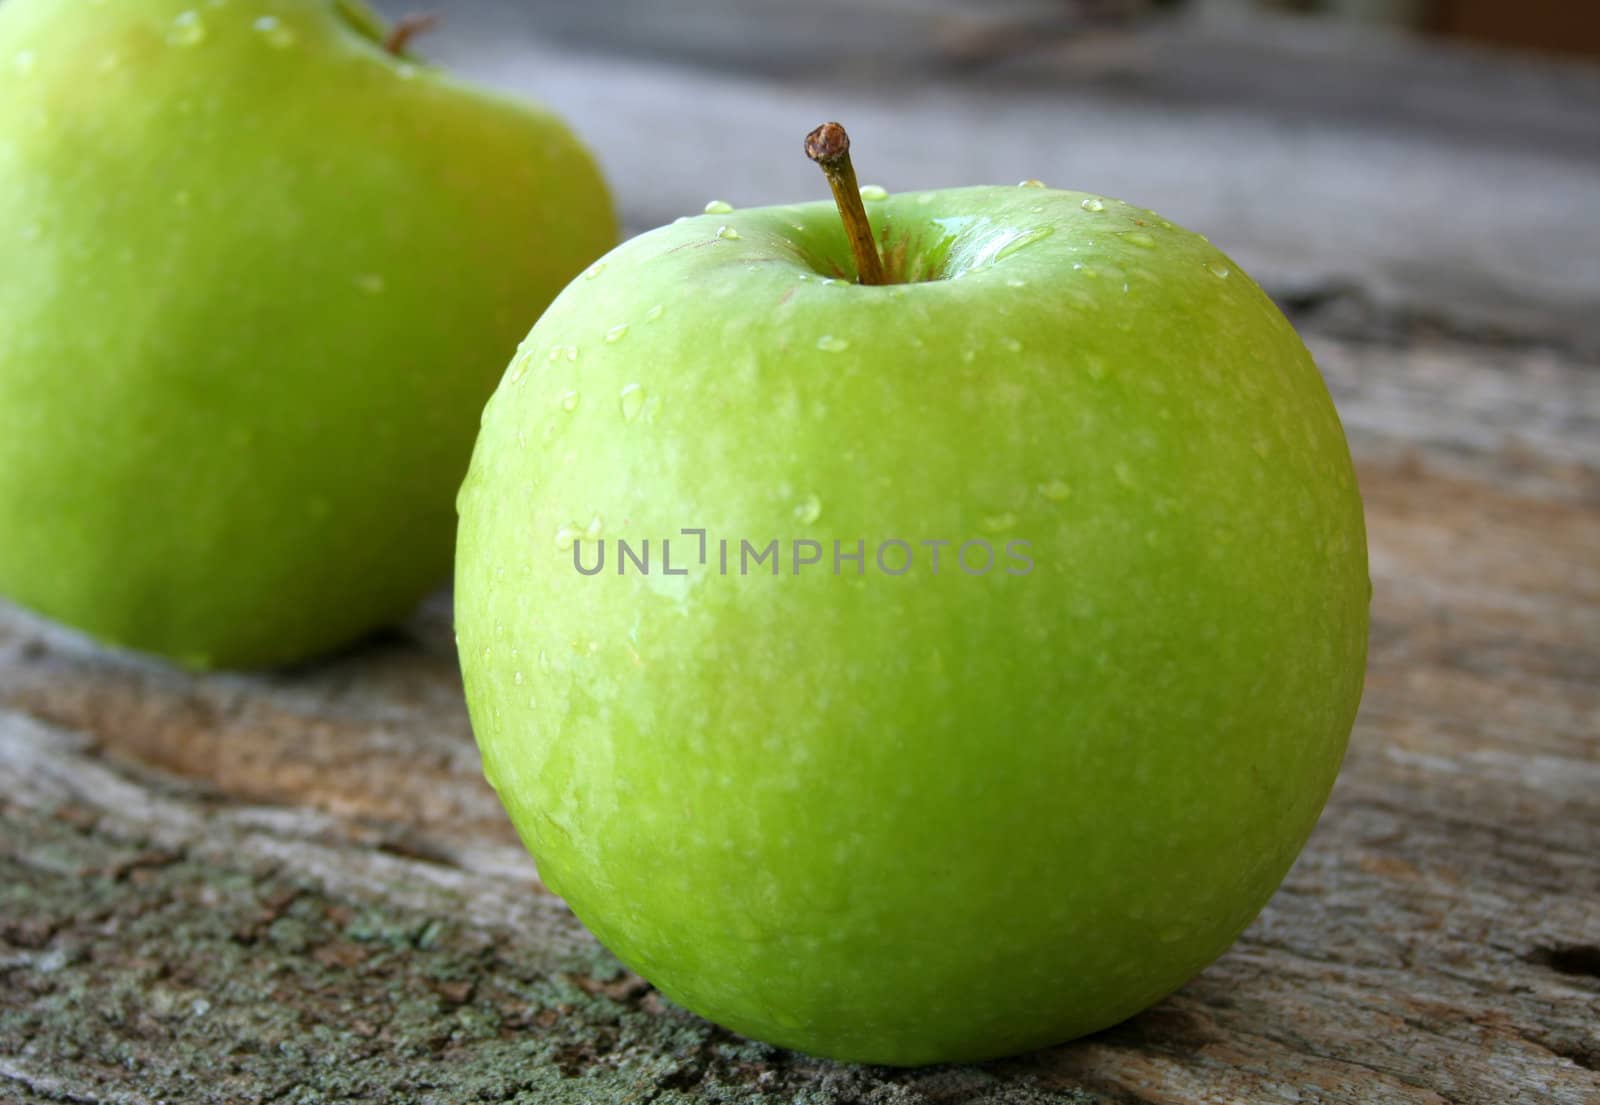 Close up of a green apple

